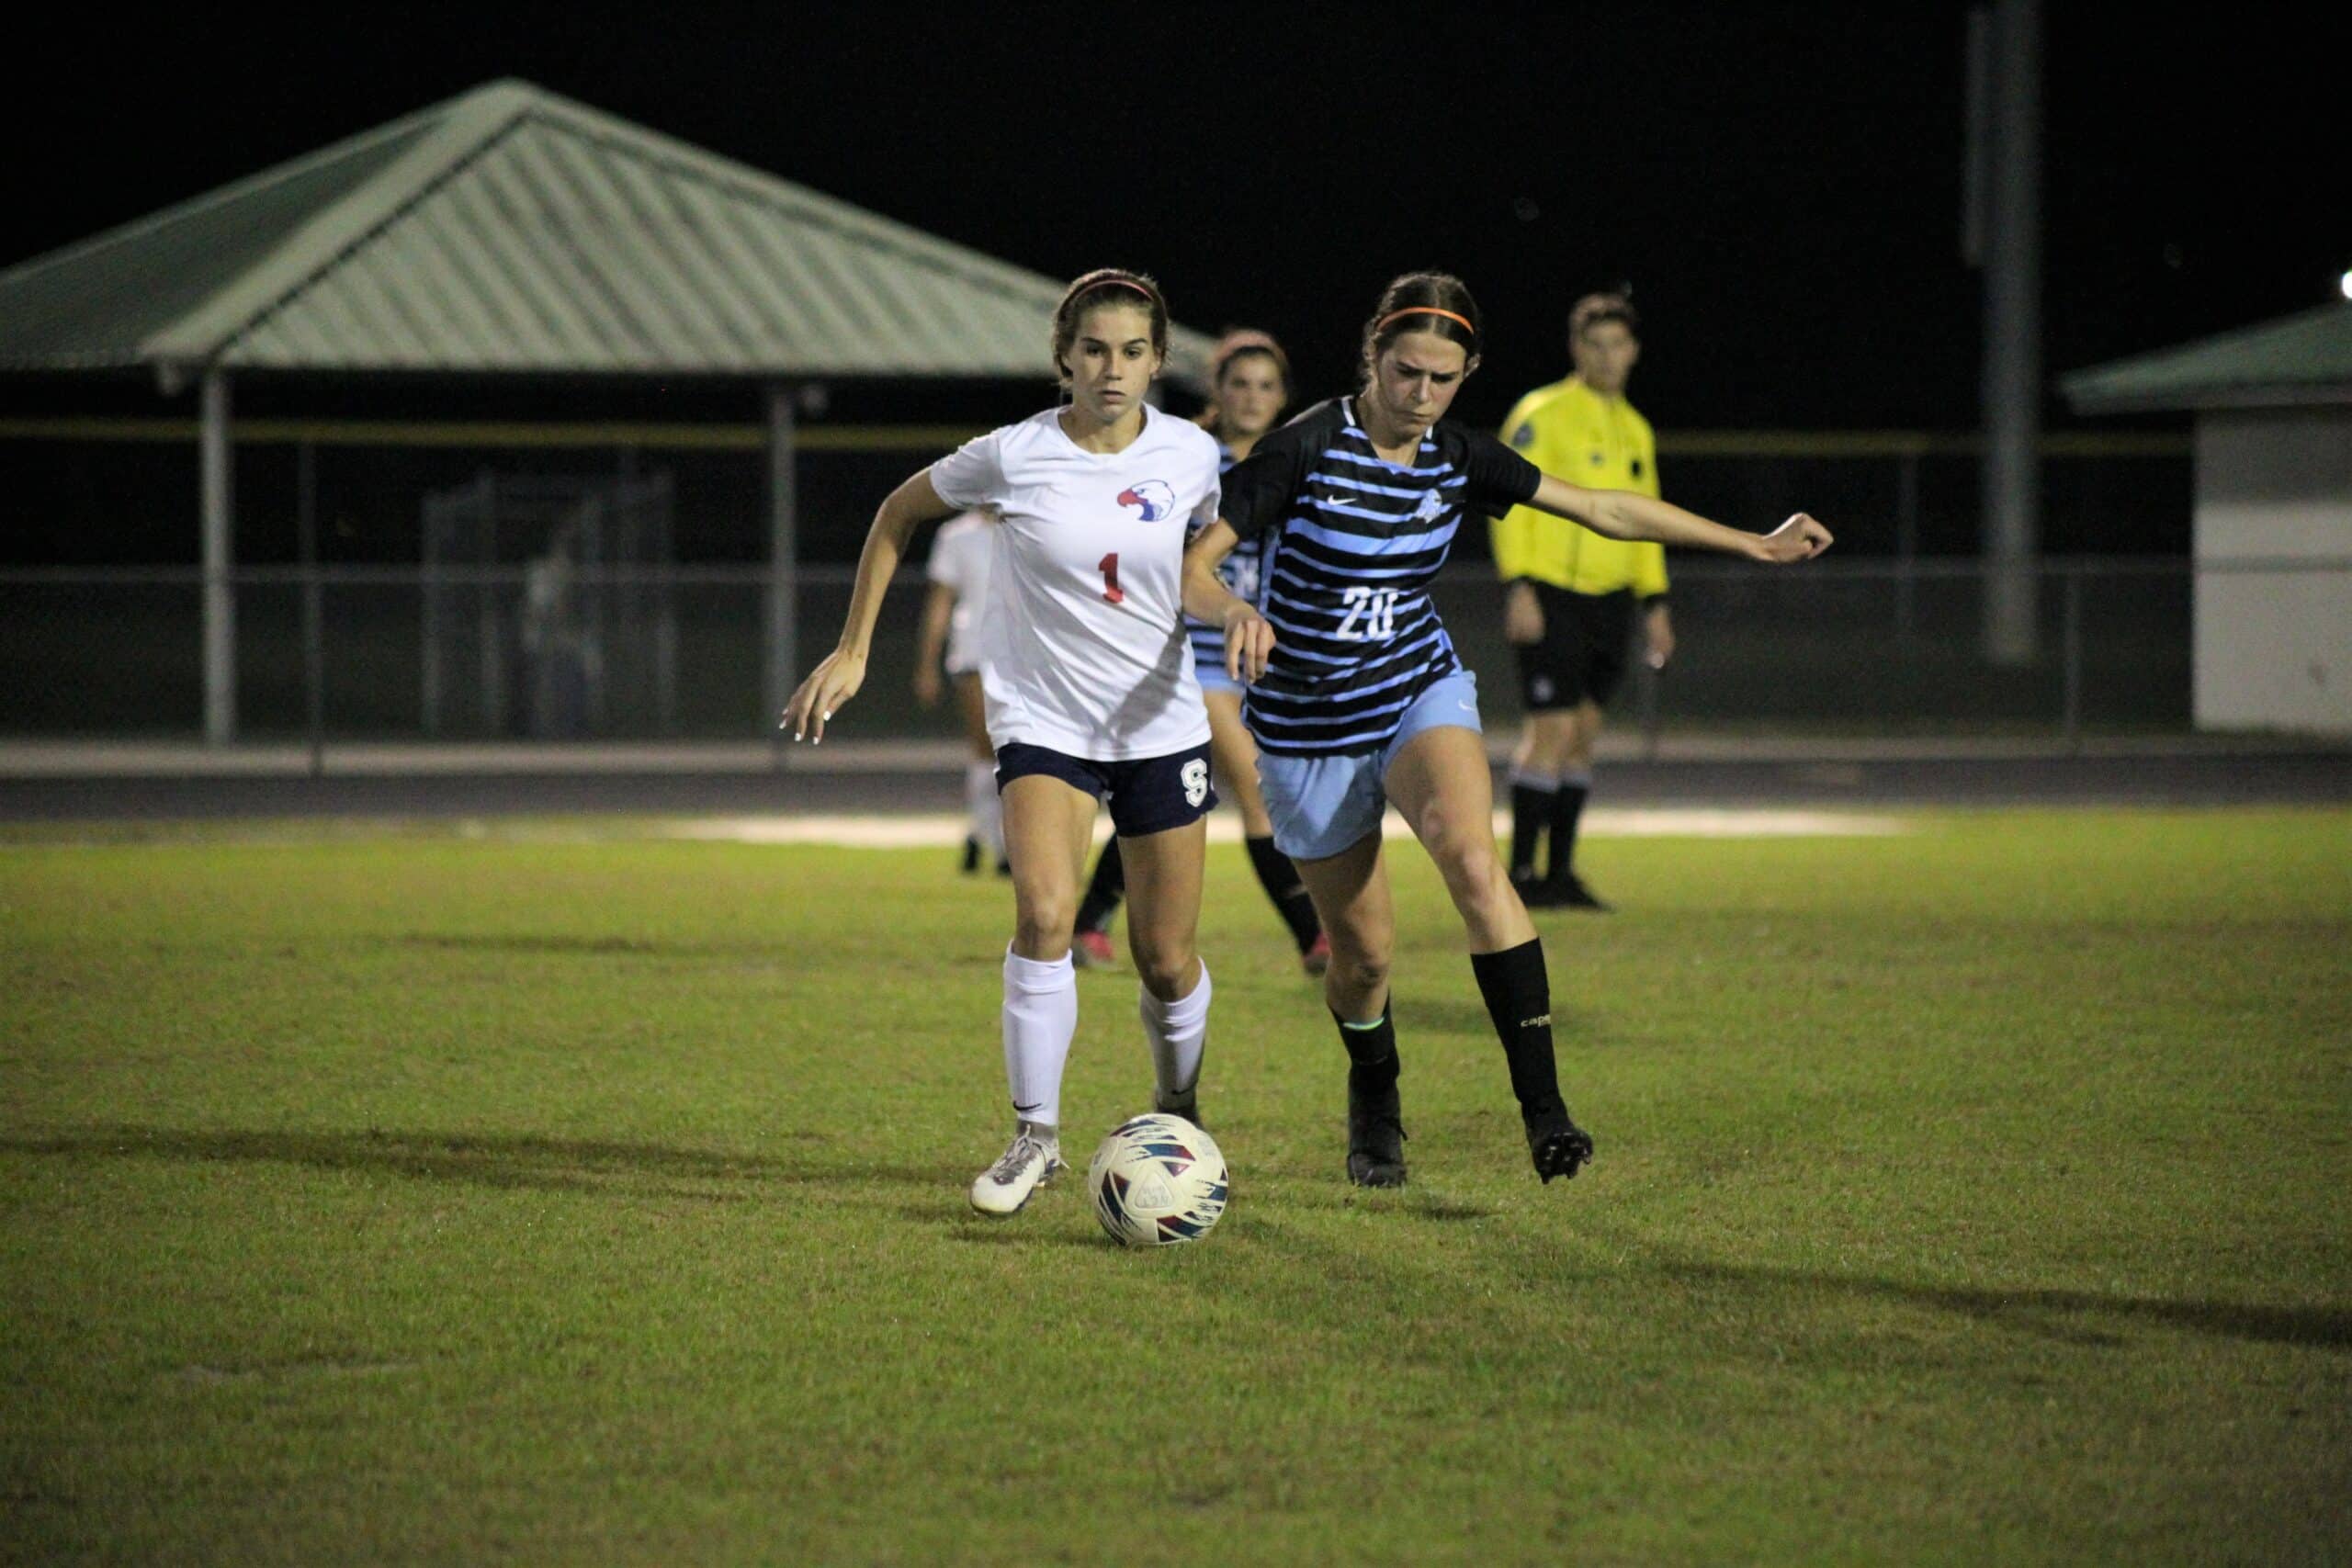 Springstead Lauren Anderson fights opponent for possession of the ball SHS vs NTC 12/14 By Hanna Fox.